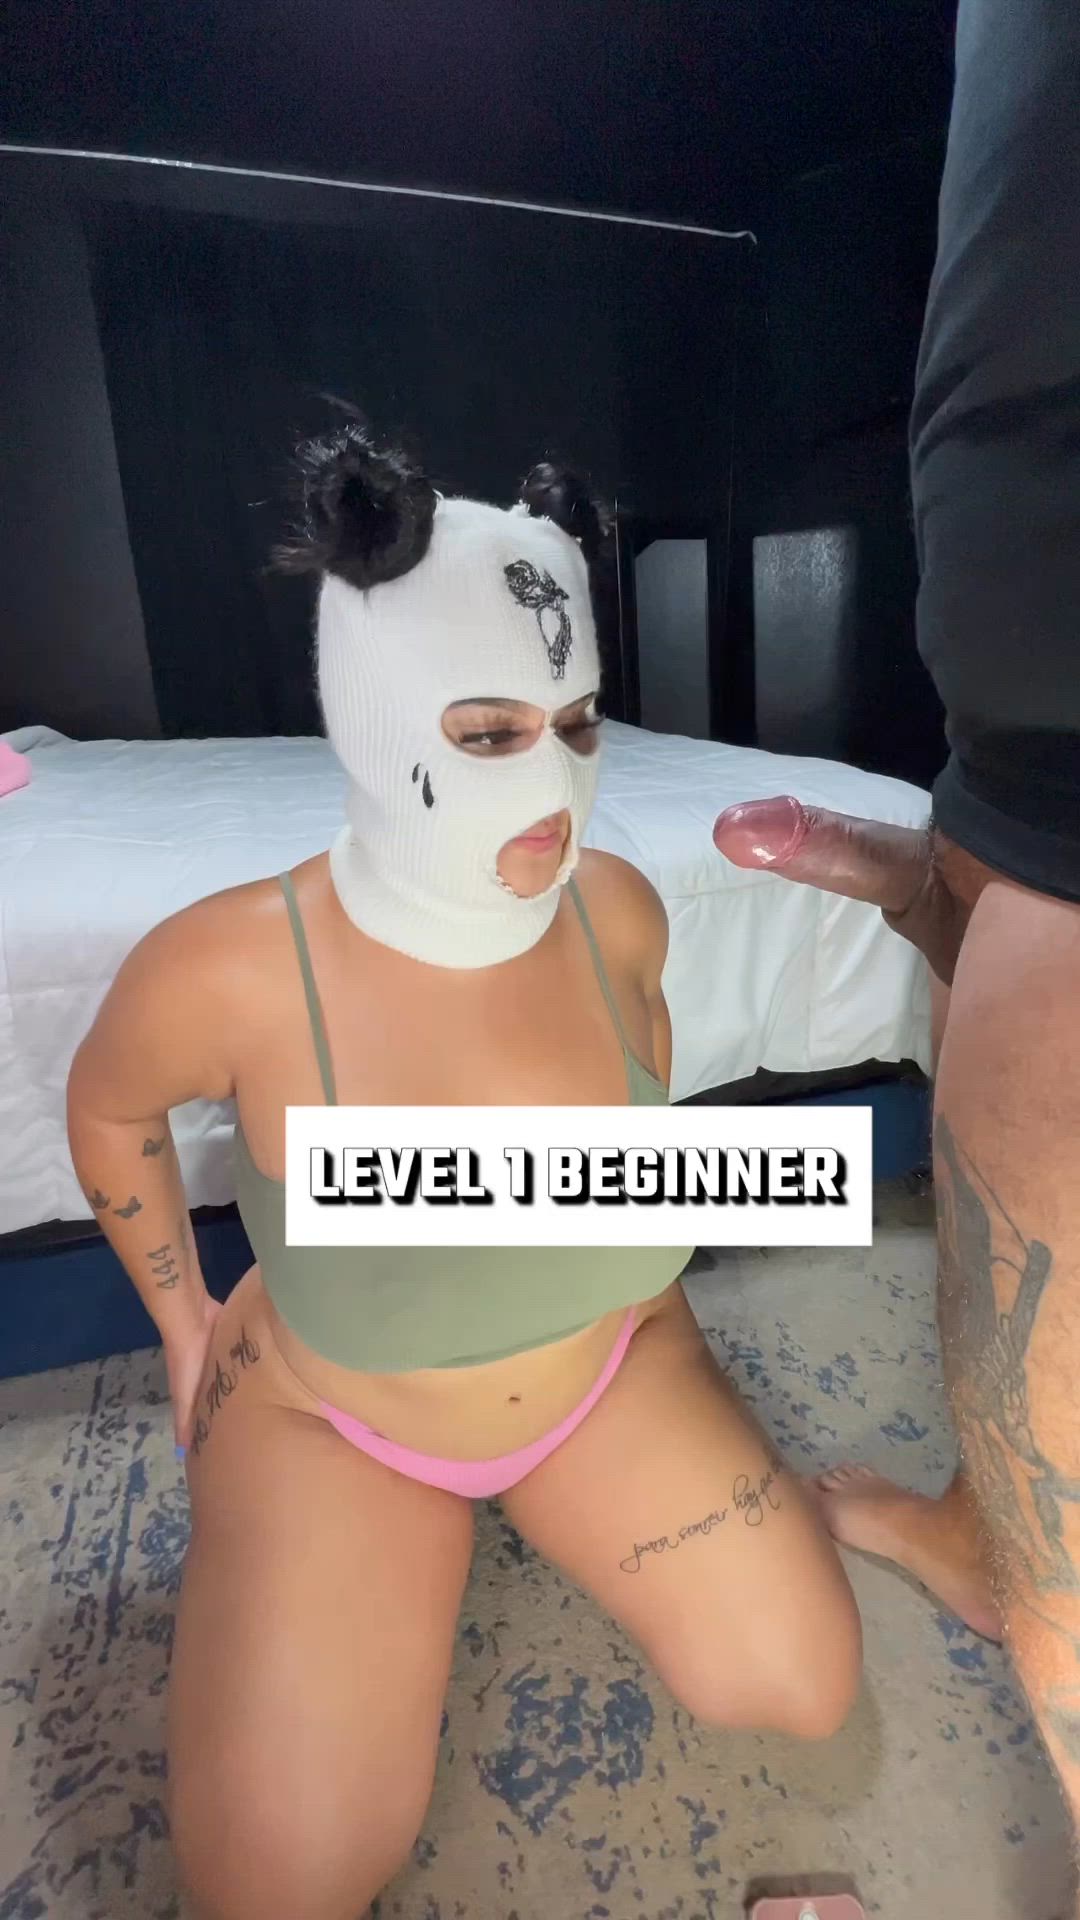 Blowjob porn video with onlyfans model zaramysterio <strong>@zaramysterio</strong>